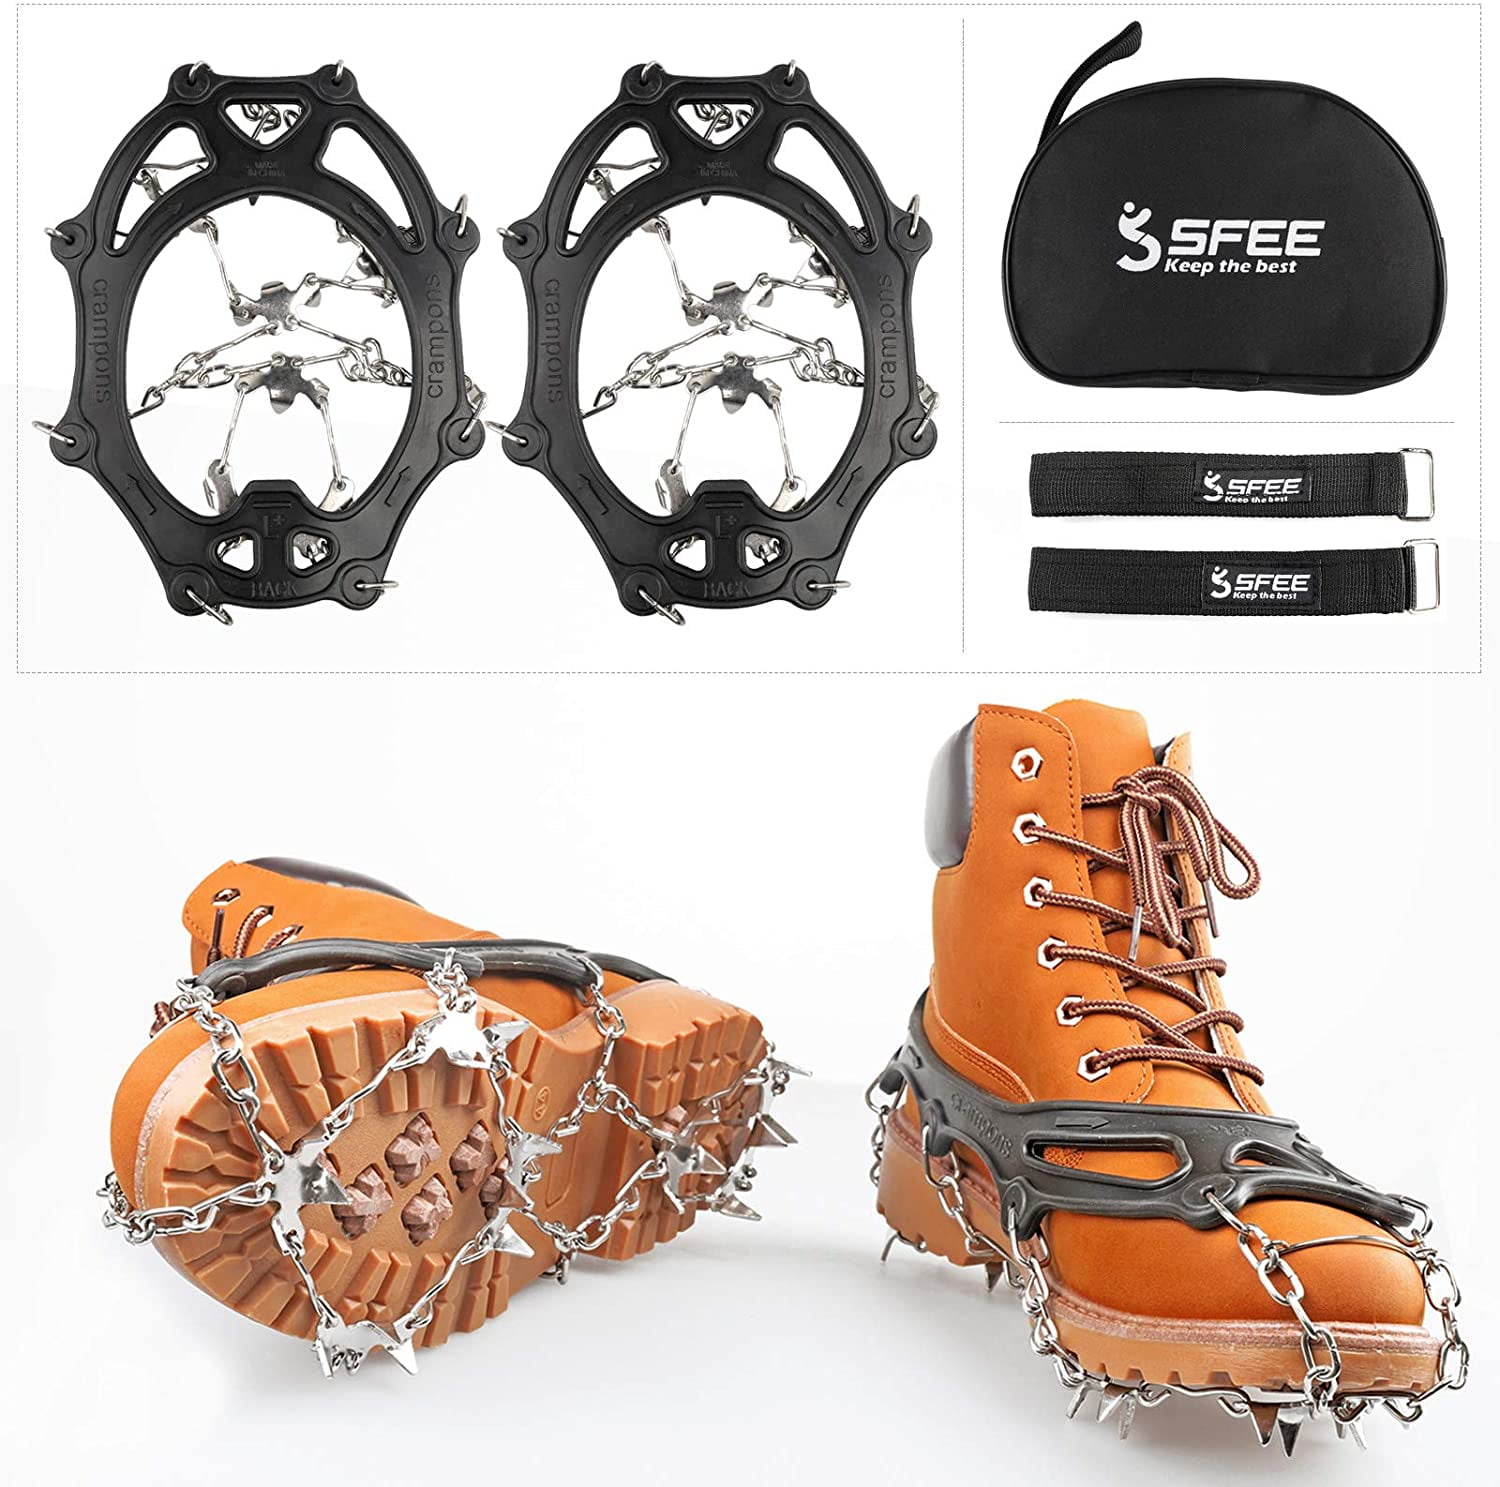 SALTNLIGHT Upgraded 28 Spikes Crampons Ice Cleats for Shoes and Boots, Anti Slip MICROspikes for Snow Grips, Men Women Kids Snow Shoes Stainless Steel